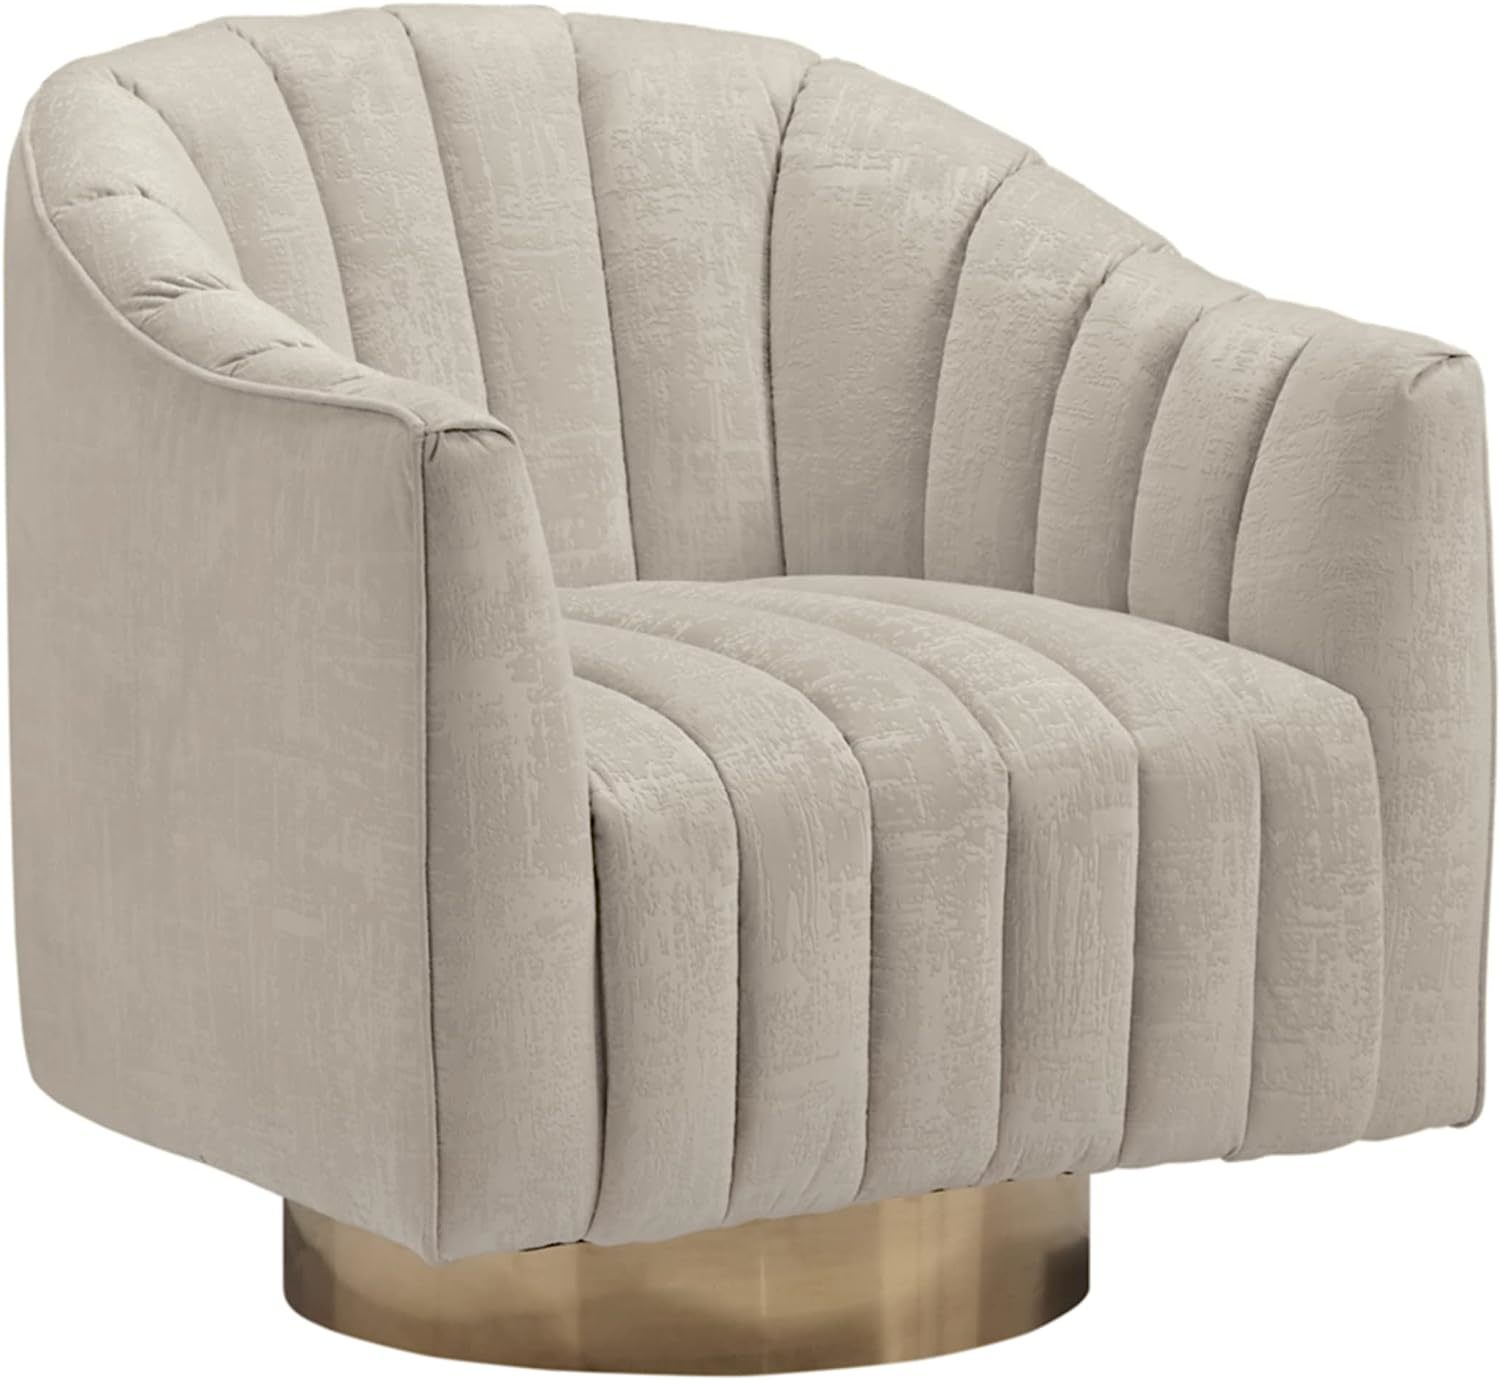 Primary image for Beige Penzlin Swivel Accent Chair By Signature Design By Ashley.